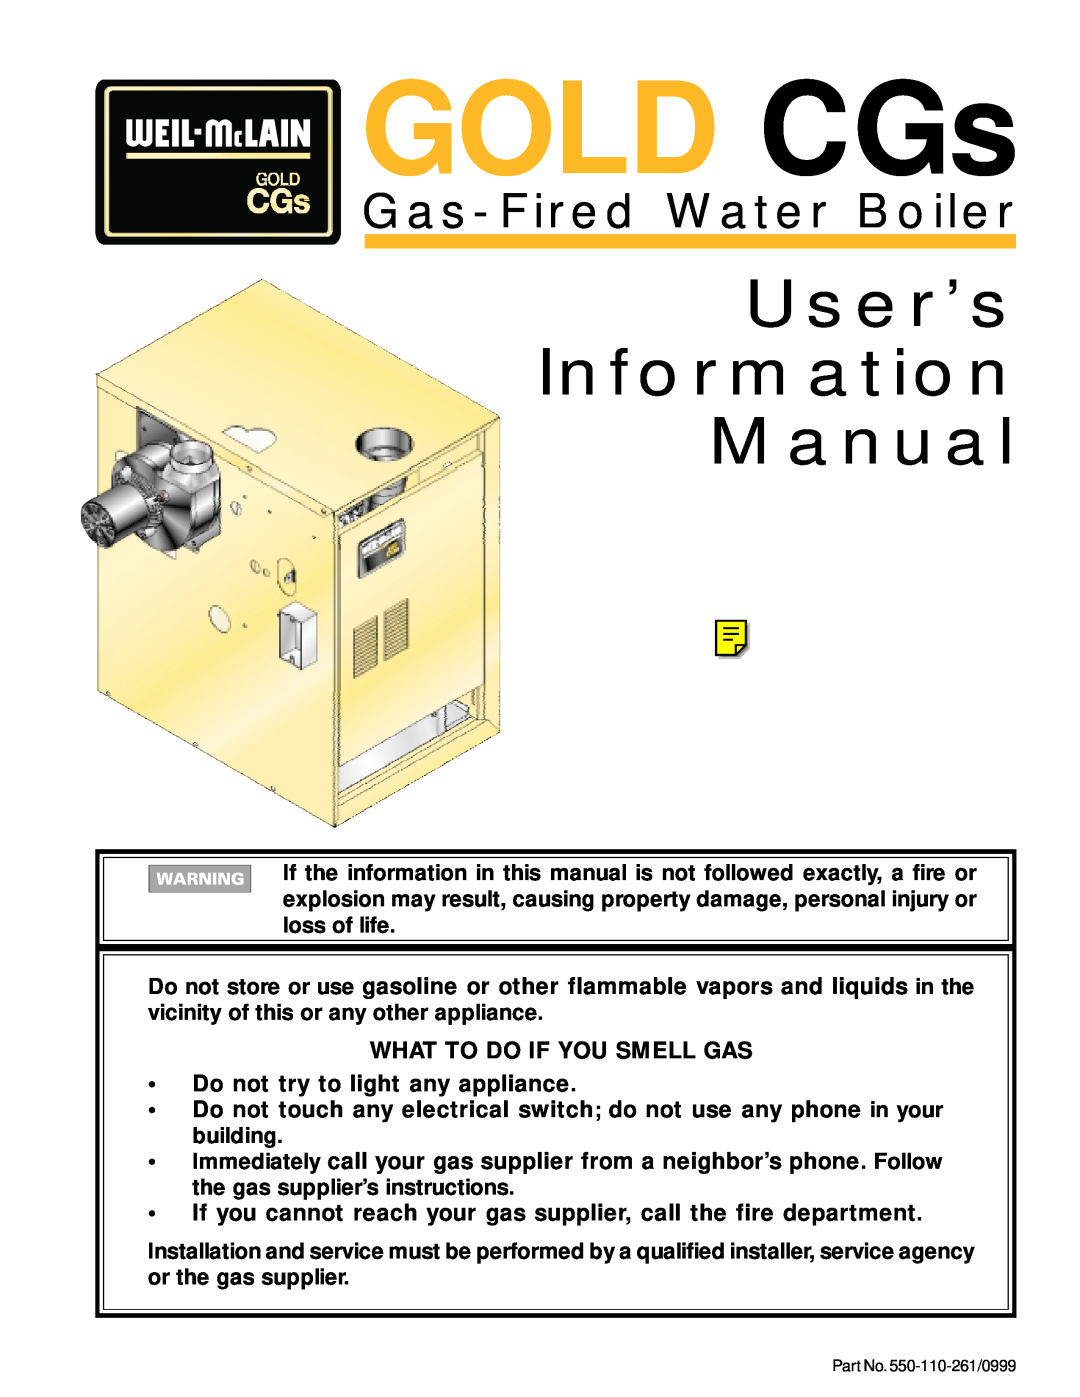 Weil-McLain GOLD CGs manual User’s Information Manual, Gas-FiredWater Boiler 